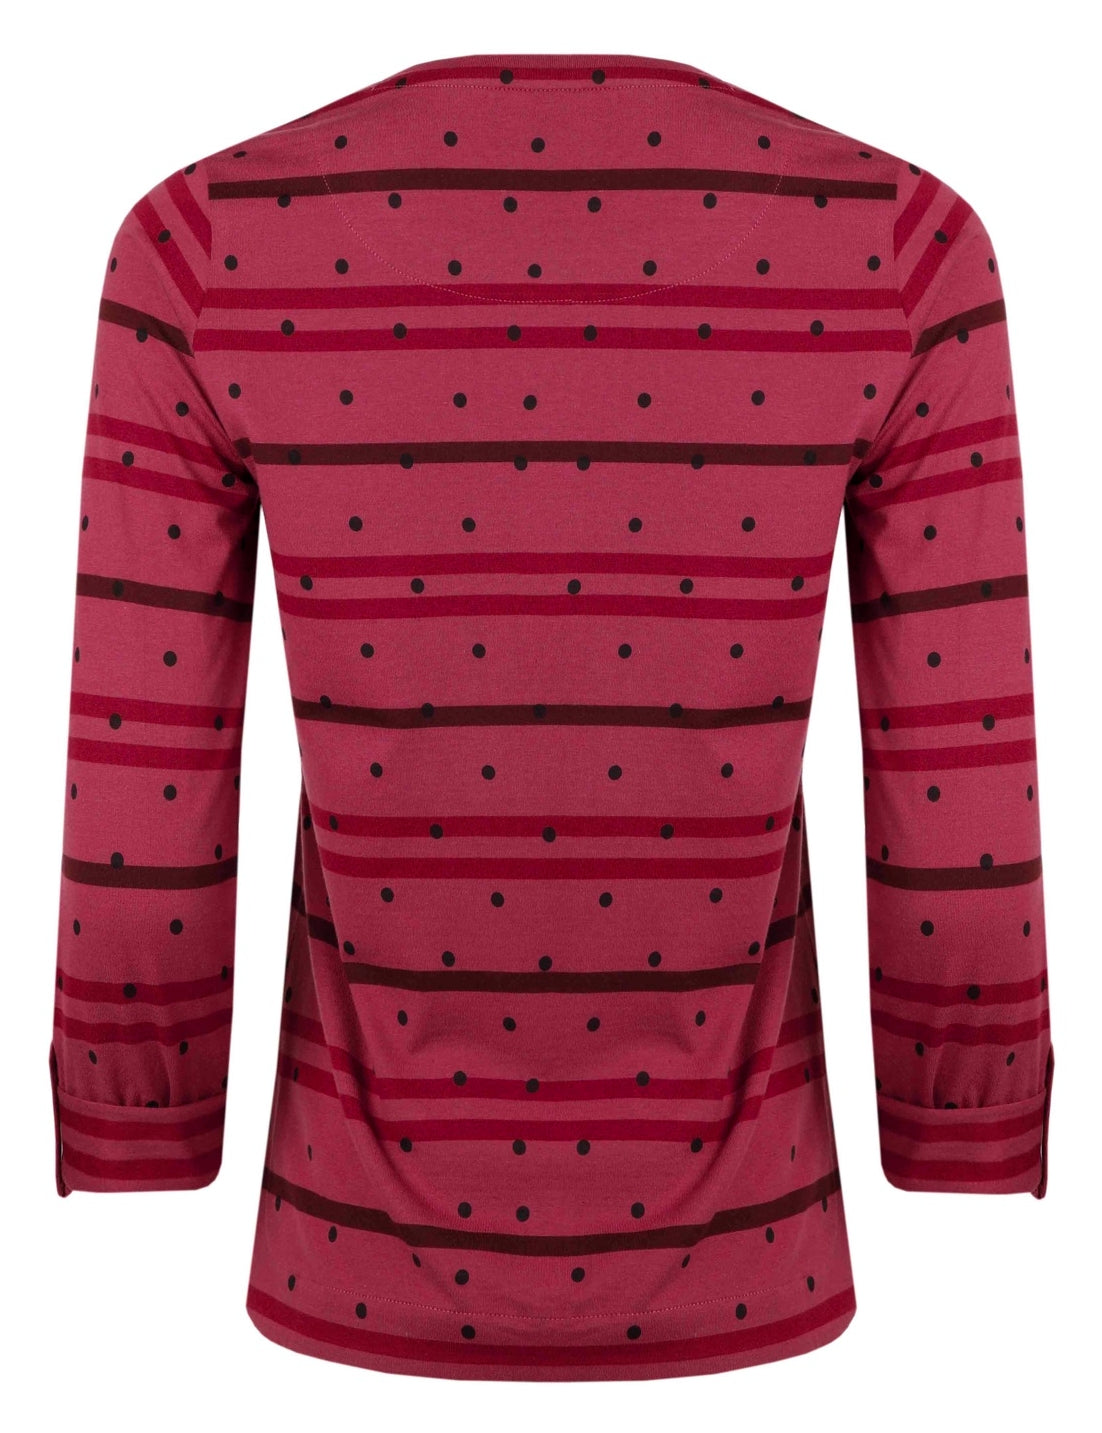 A women's long sleeve Billie t-shirt from Weird Fish in Crushed Berry with a stripe and dotty pattern, made from an organic cotton fabric with a crew neckline and roll up sleeves.